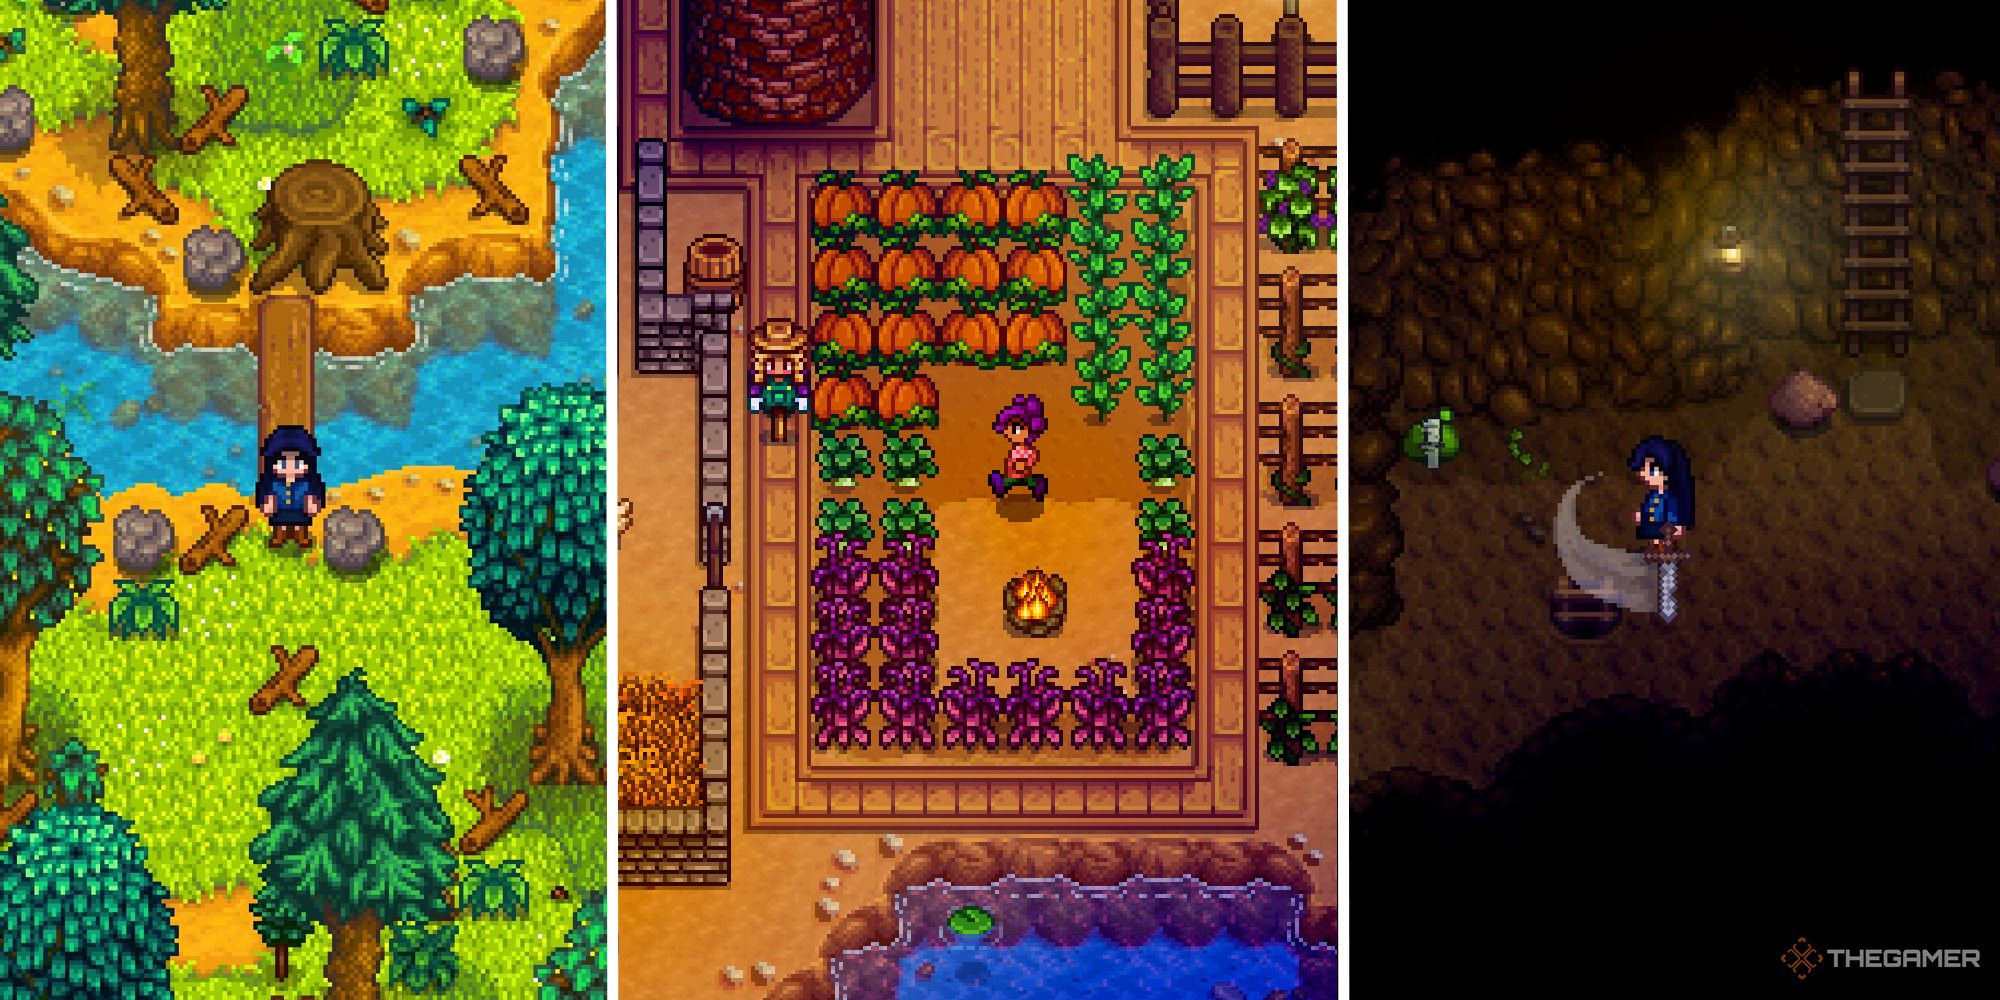 stardew valley split image showing player in farm debris, player in evening near crops, and player slaying a slime